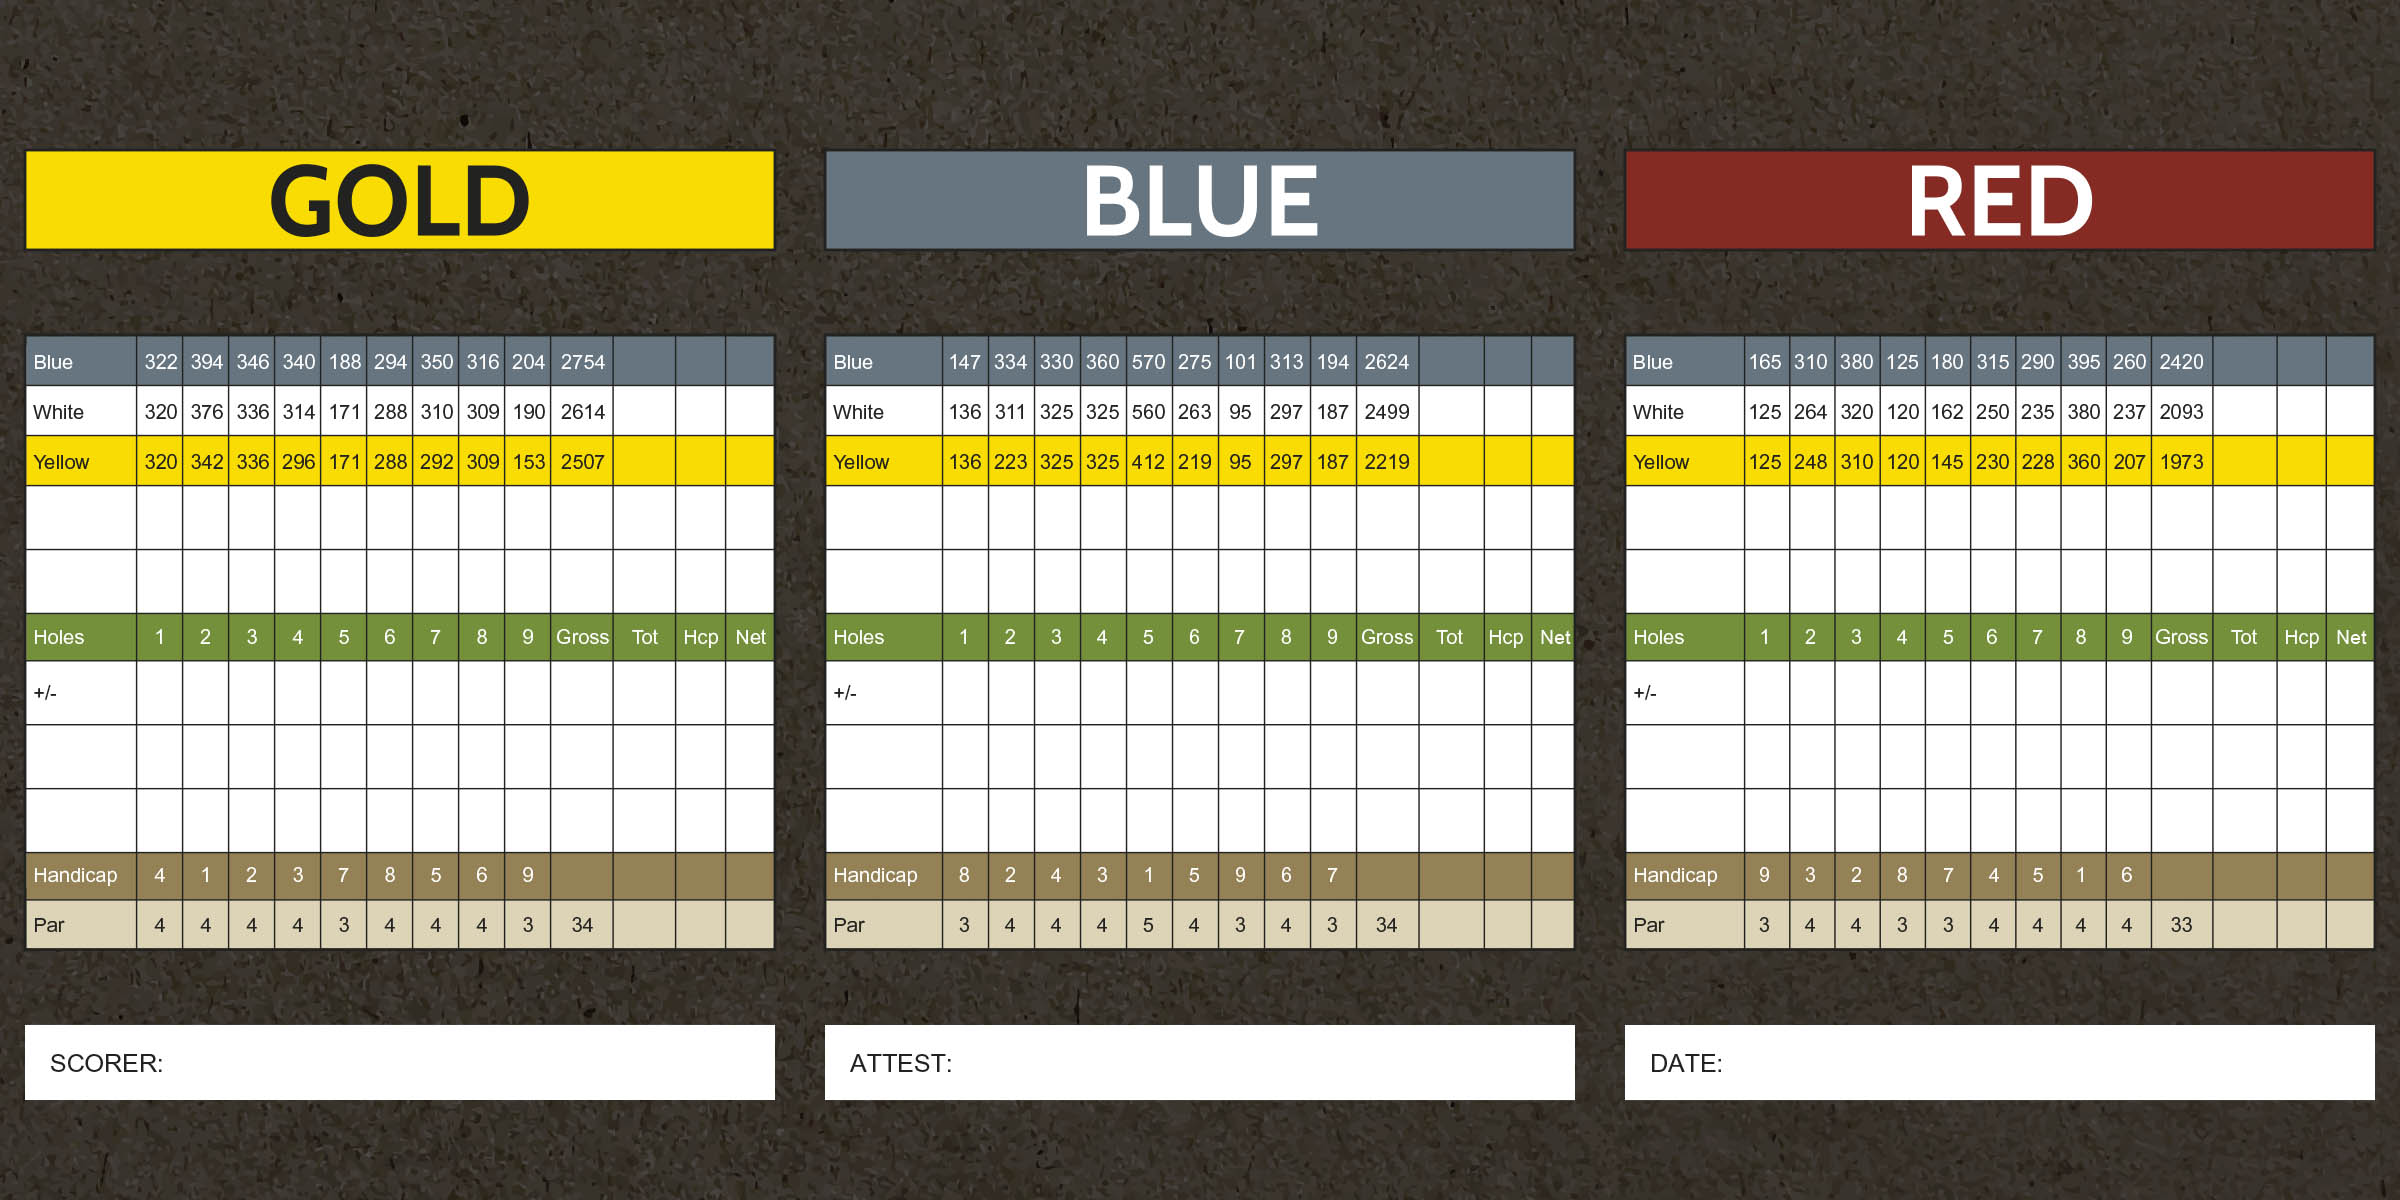 This is an image of Brookfield Golf Club's scorecard. For those who are visually impaired, please call 1-888-833-8787 for a representative to verbally guide you through the scorecard details.